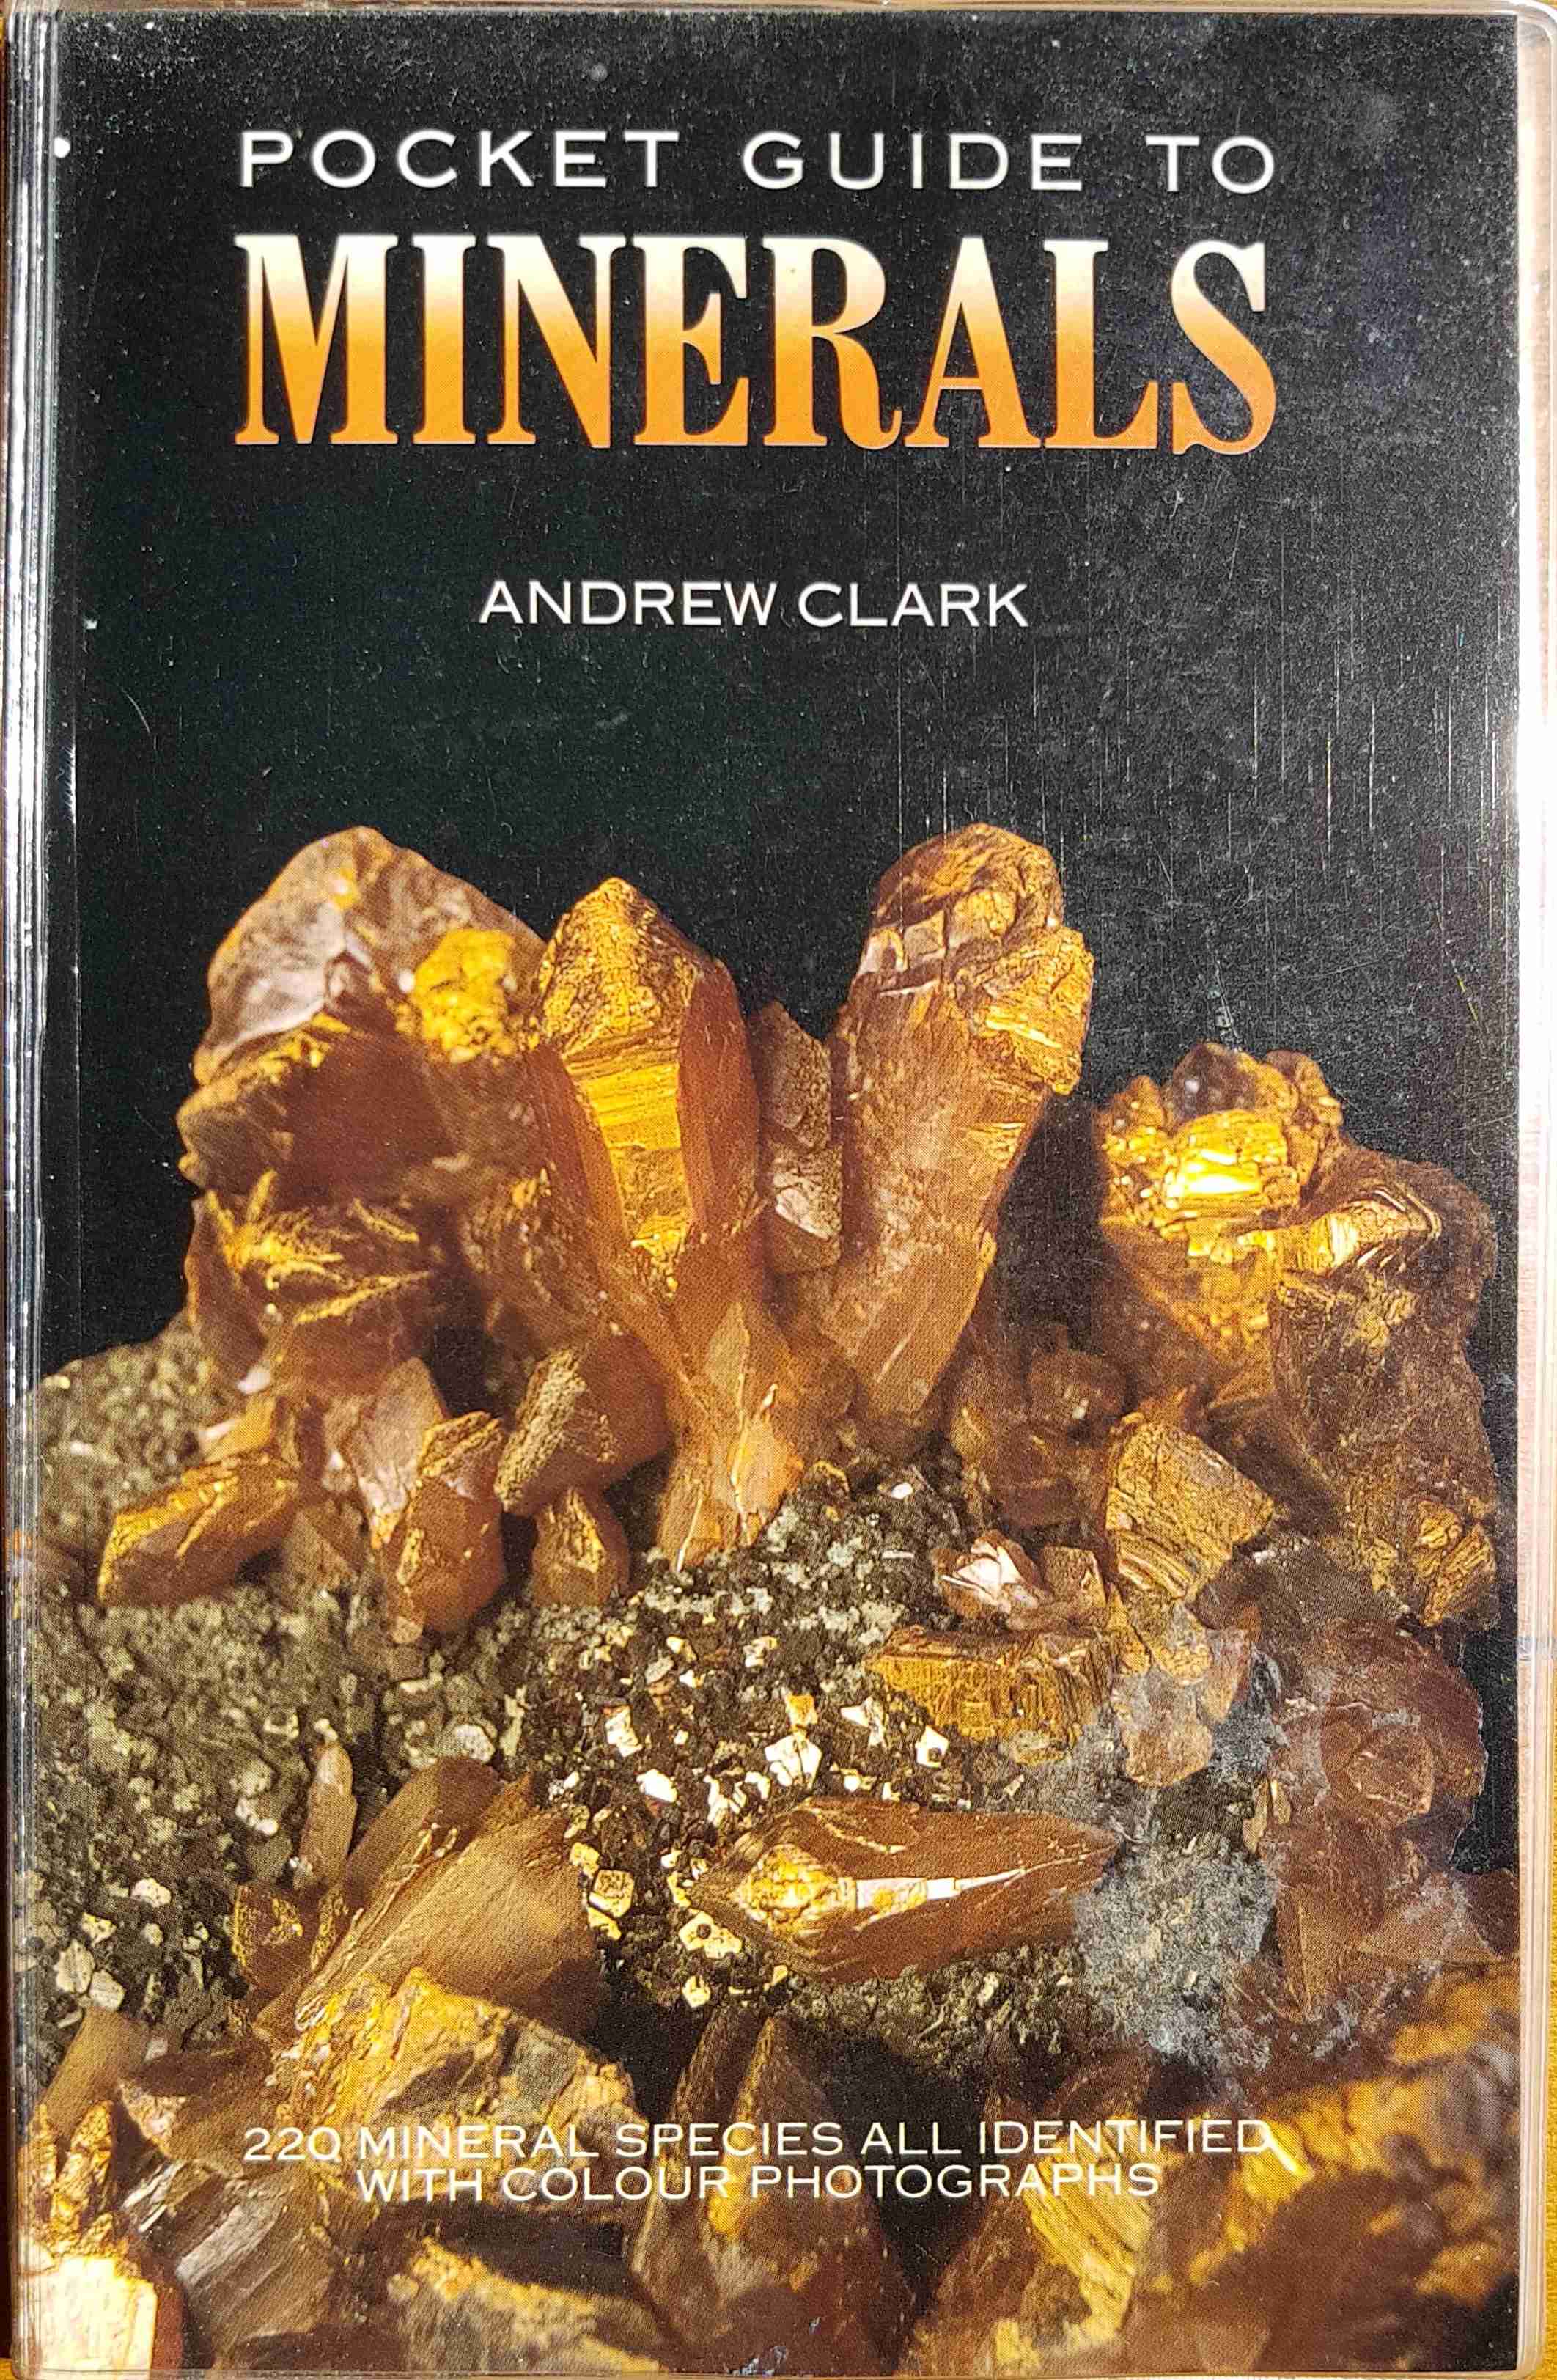 Picture of Pocket guide to minerals by artist Andrew Clark 